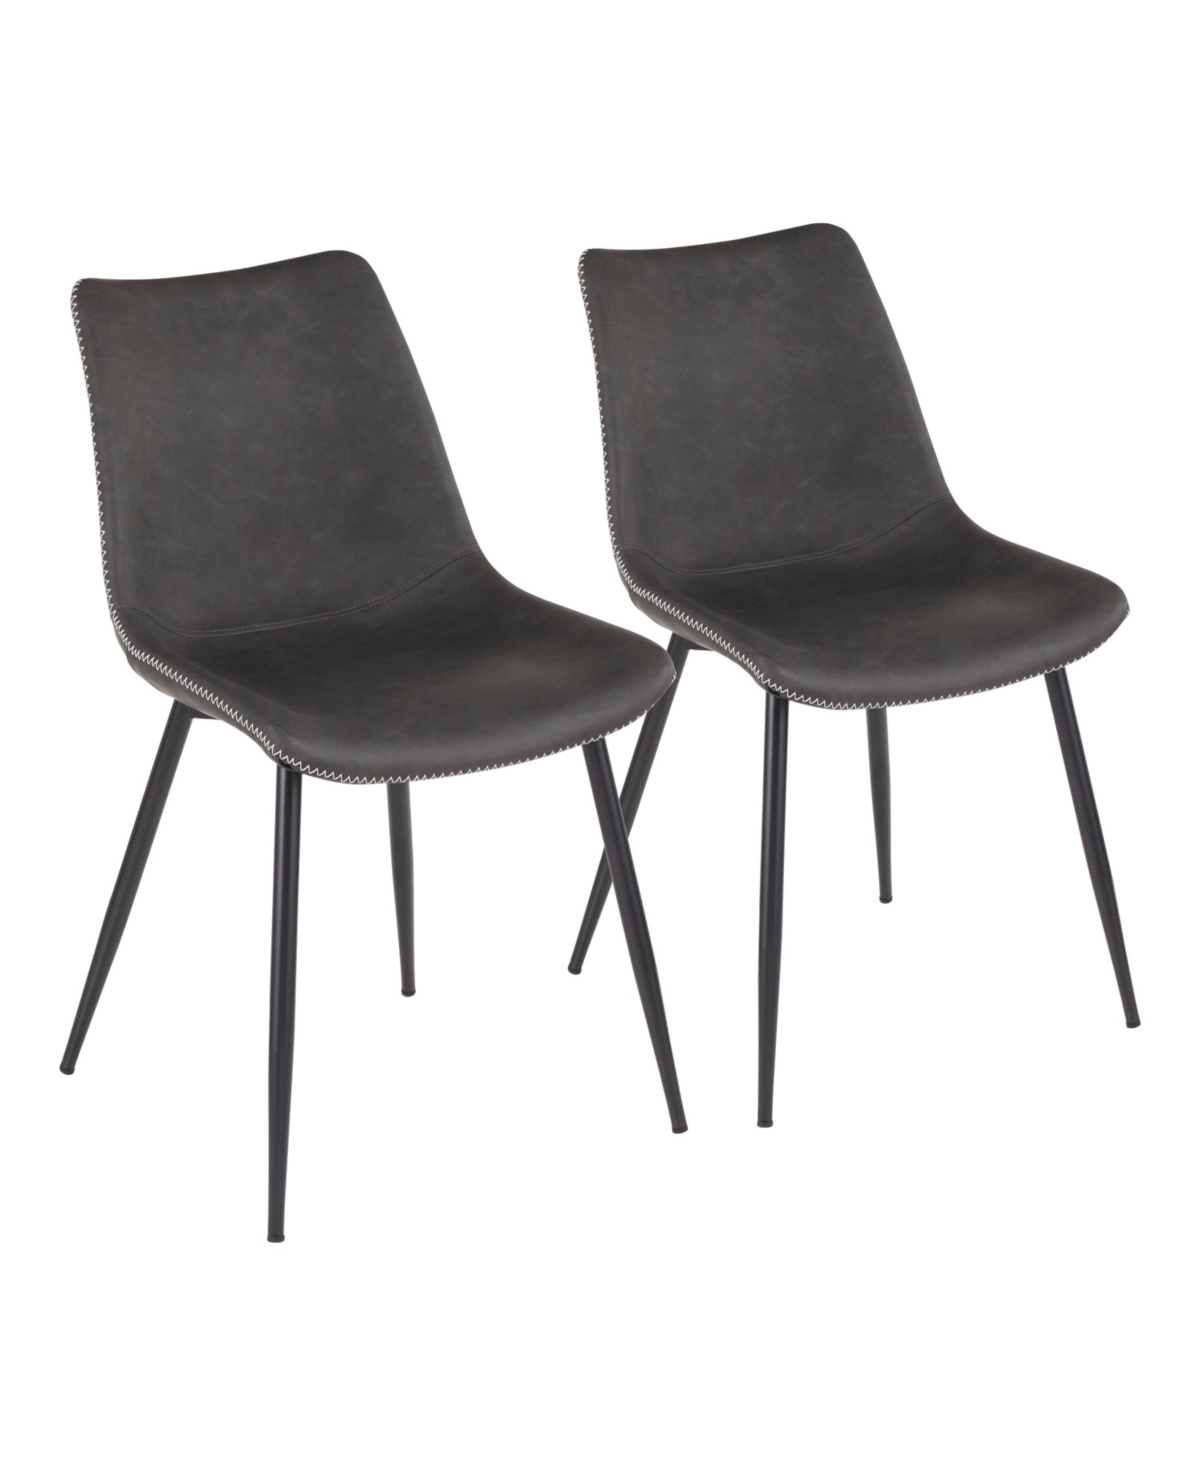 Durango Dining Chairs, Set of 2